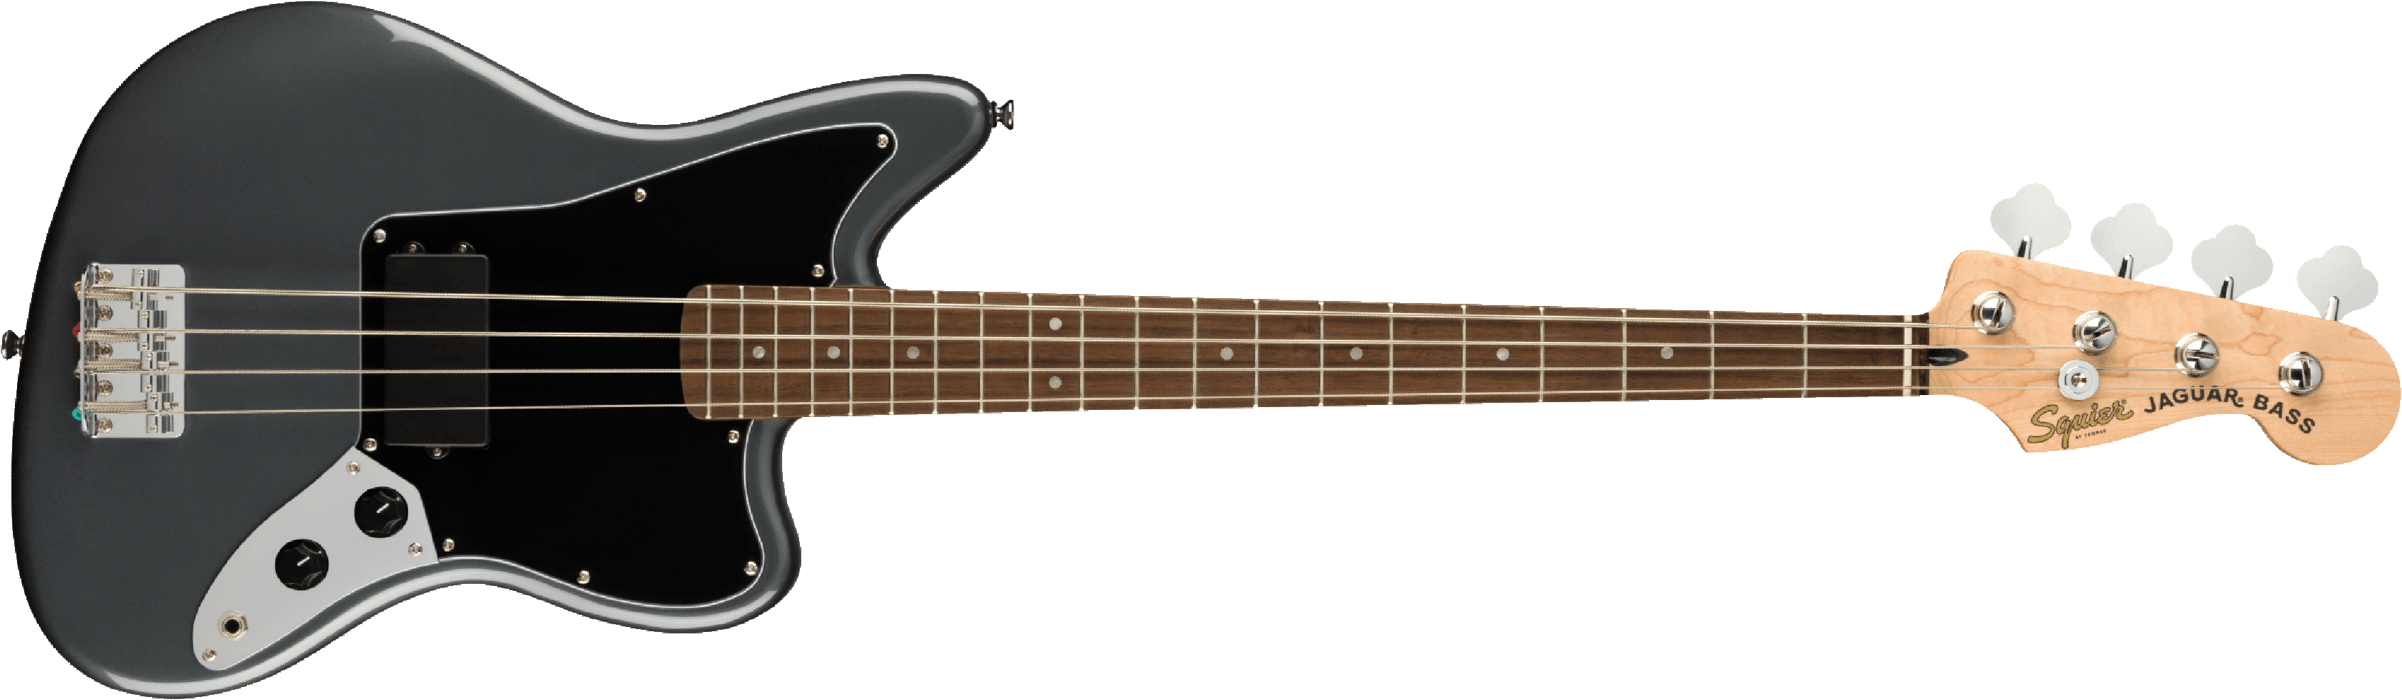 Squier Jaguar Bass Affinity 2021 Lau - Charcoal Frost Metallic - Solidbody E-bass - Main picture